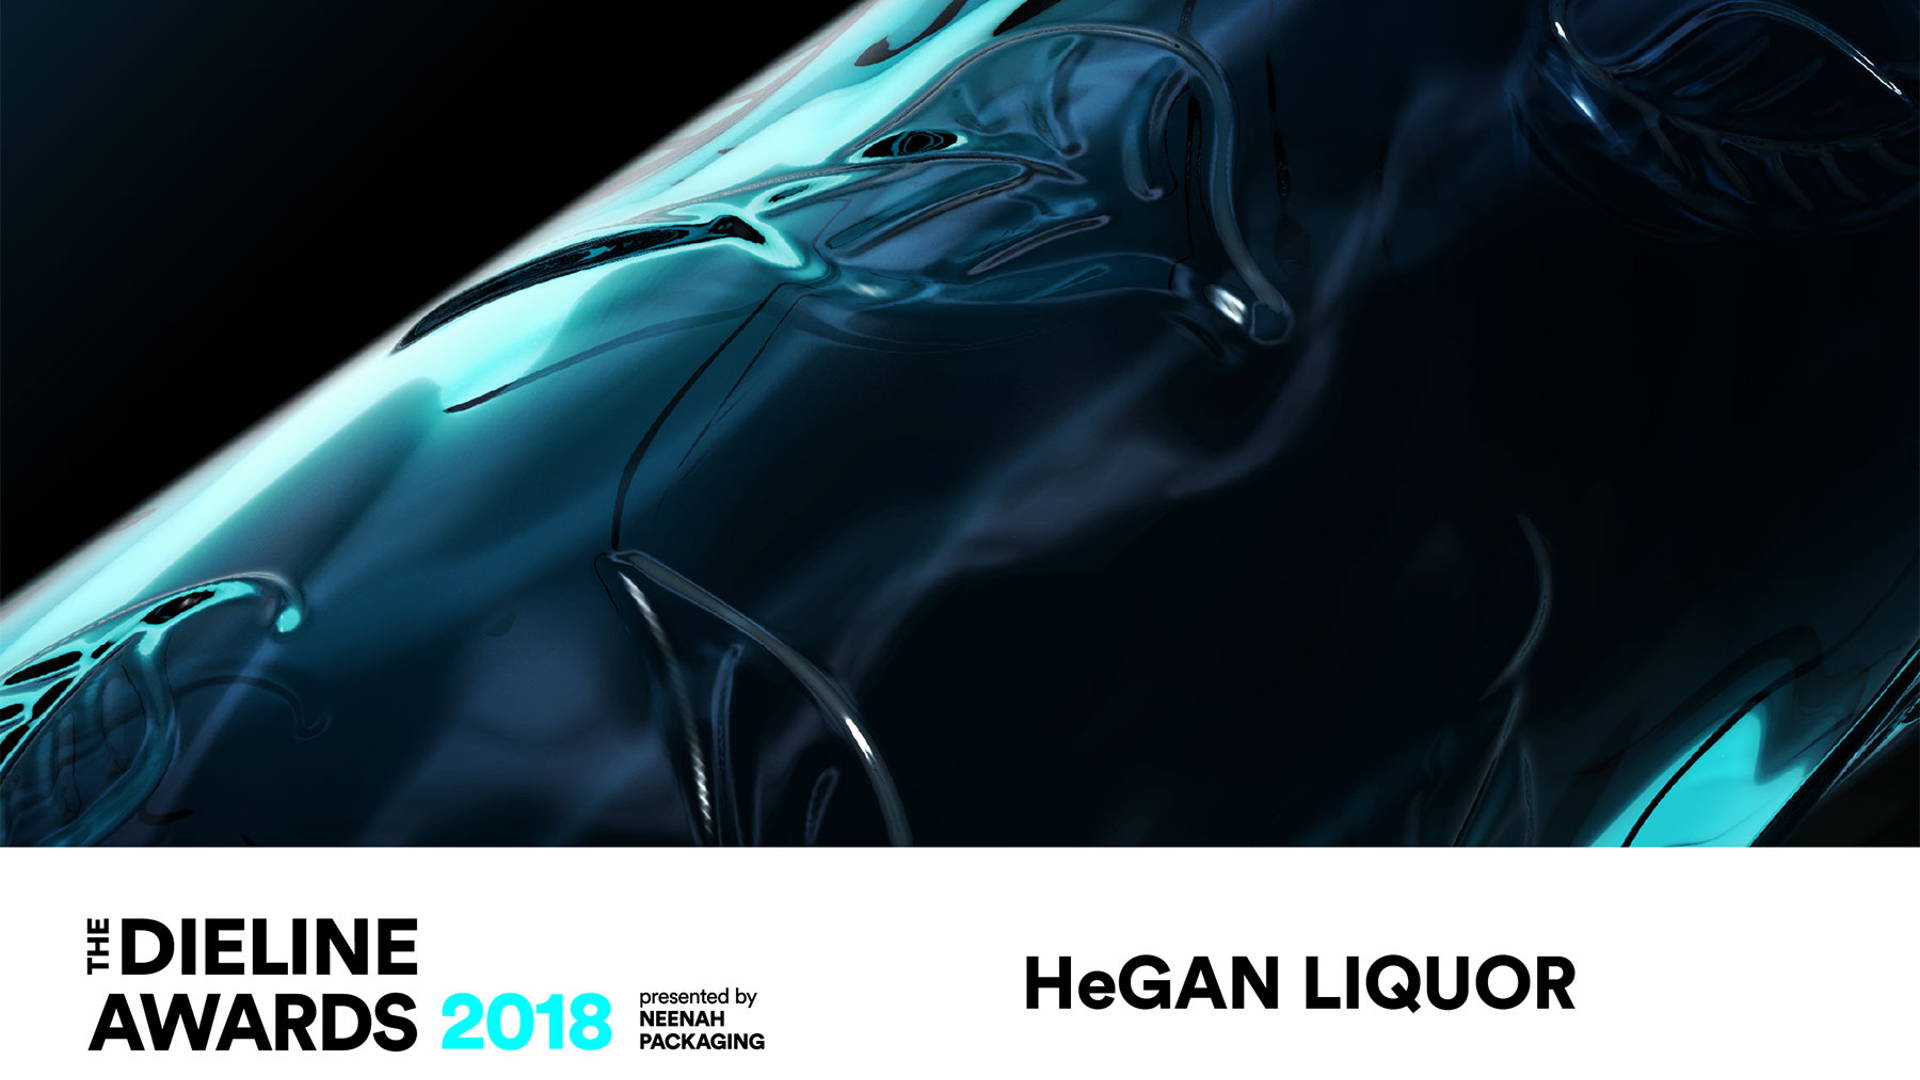 Featured image for The Dieline Awards 2018 Outstanding Achievements: HeGan Liquor